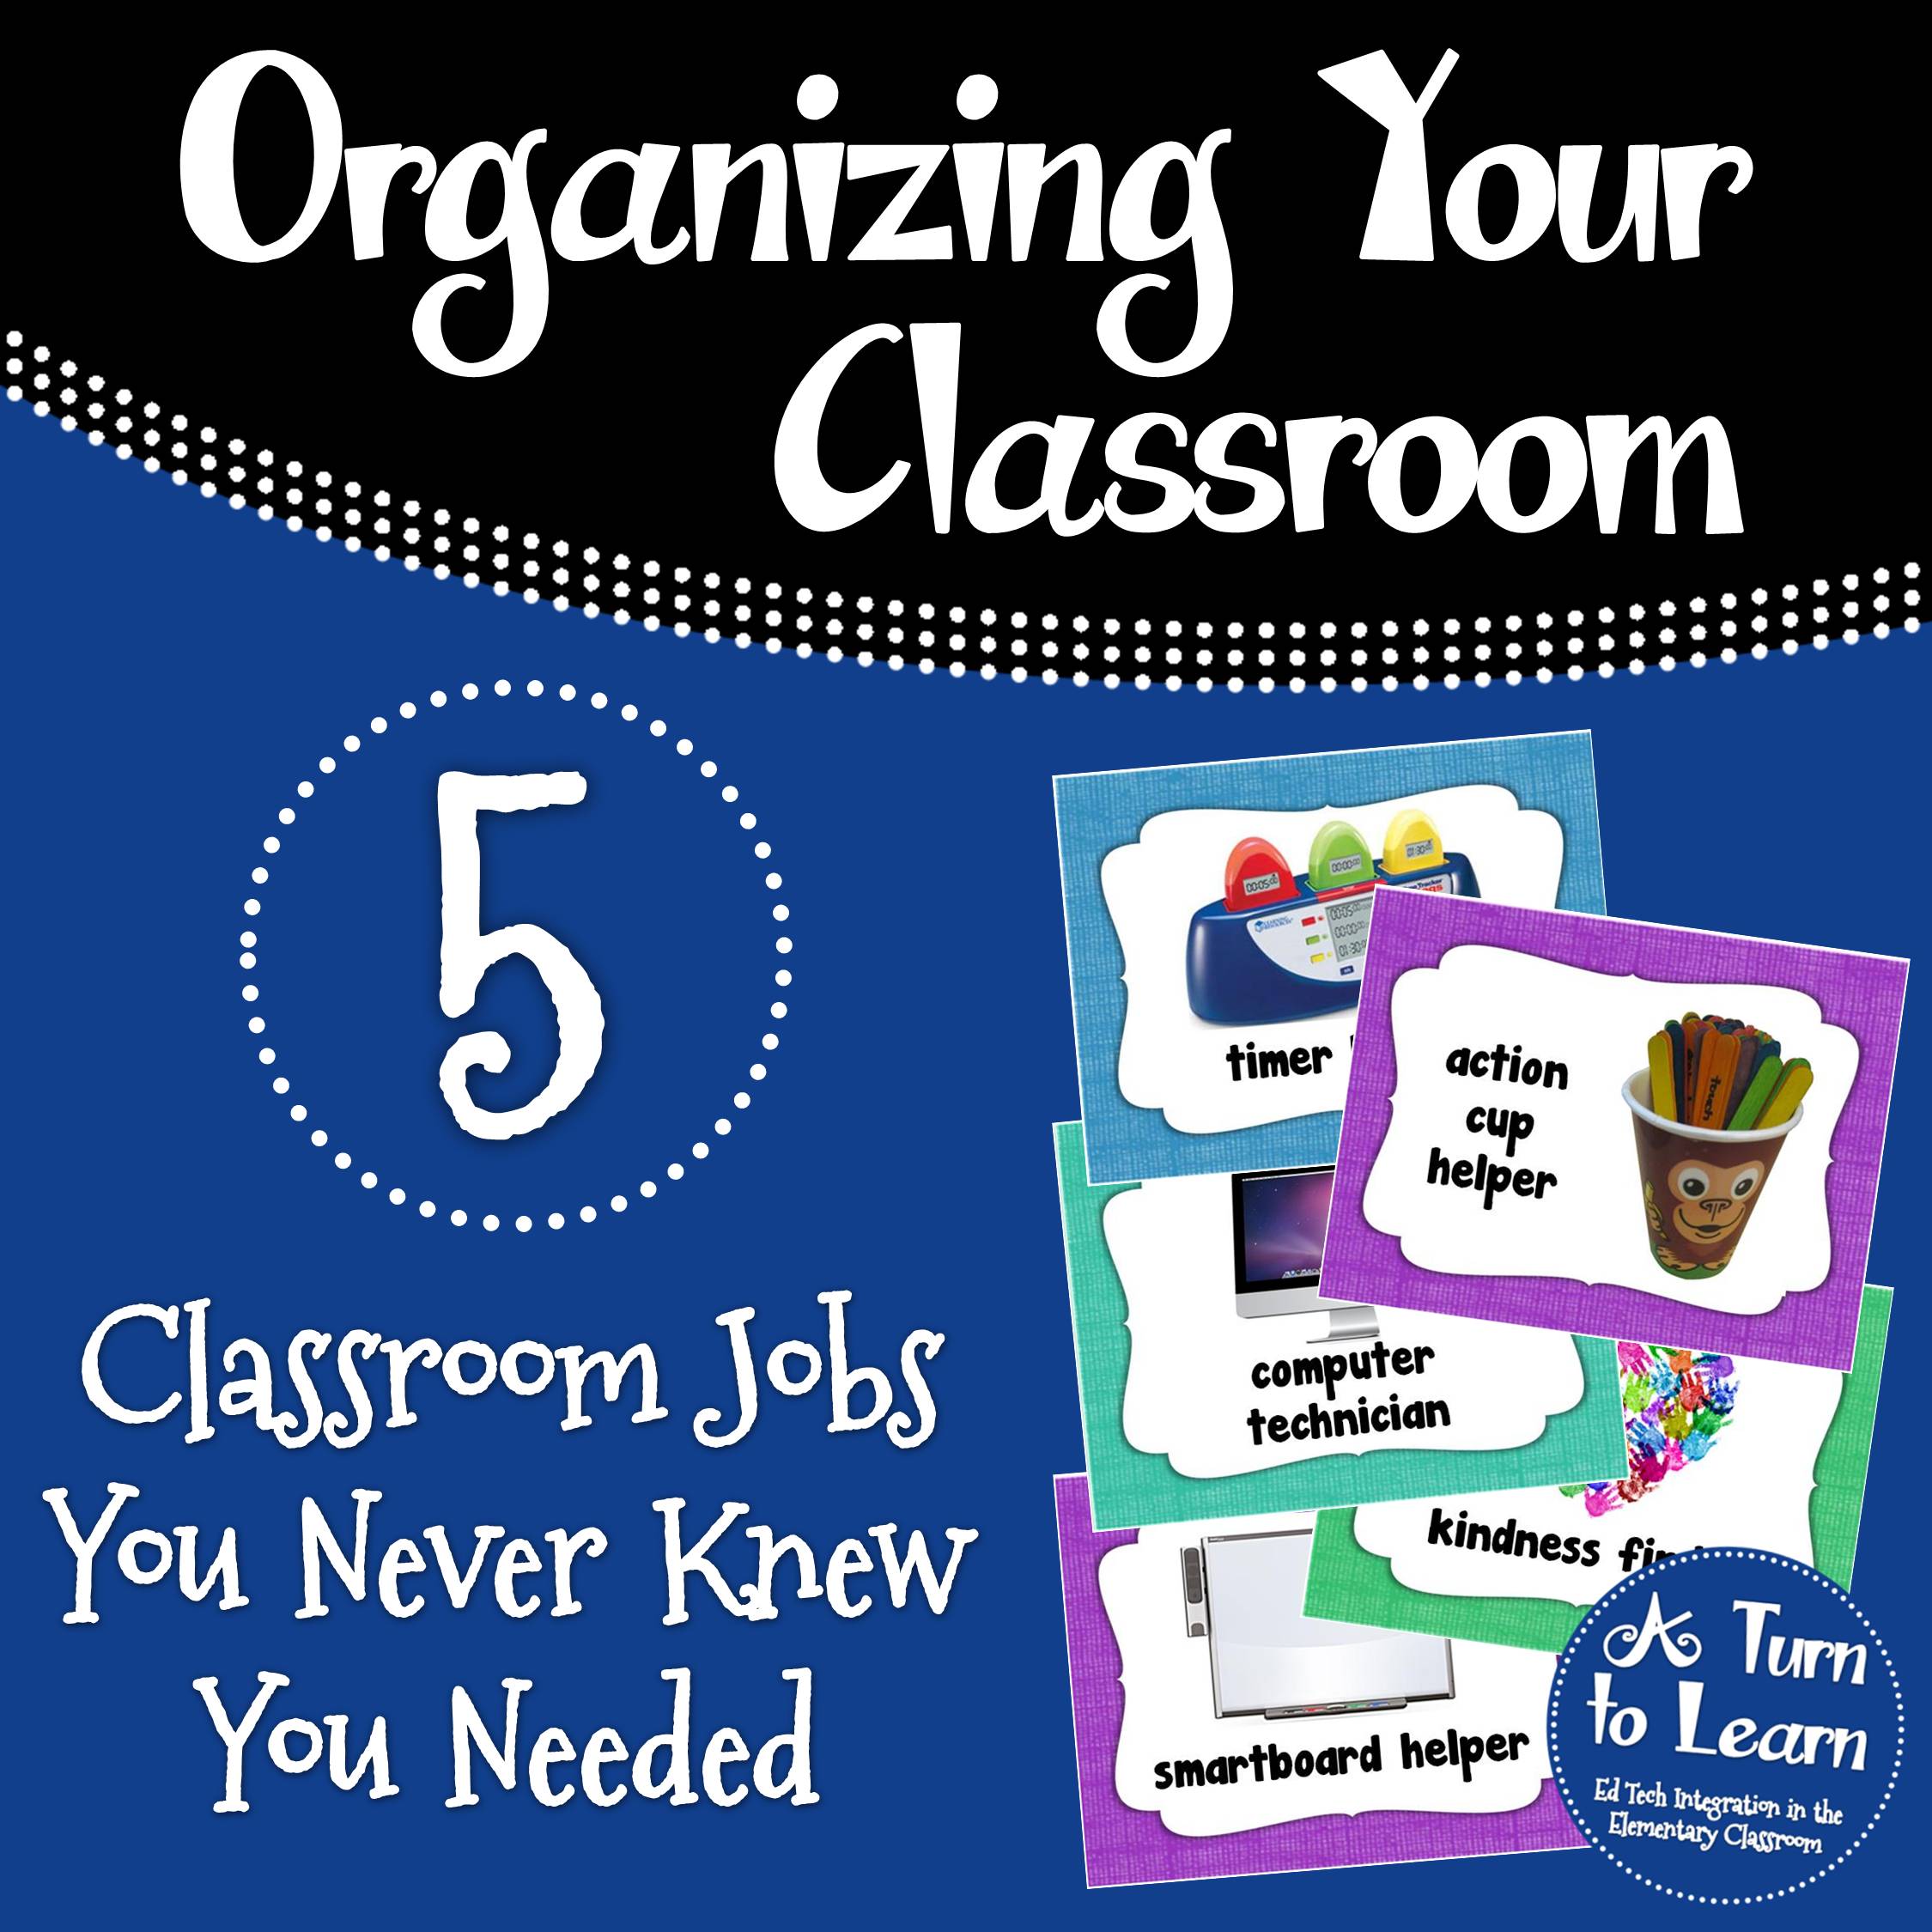 5 classroom jobs you never knew you needed... some awesome ideas for elementary classroom jobs!